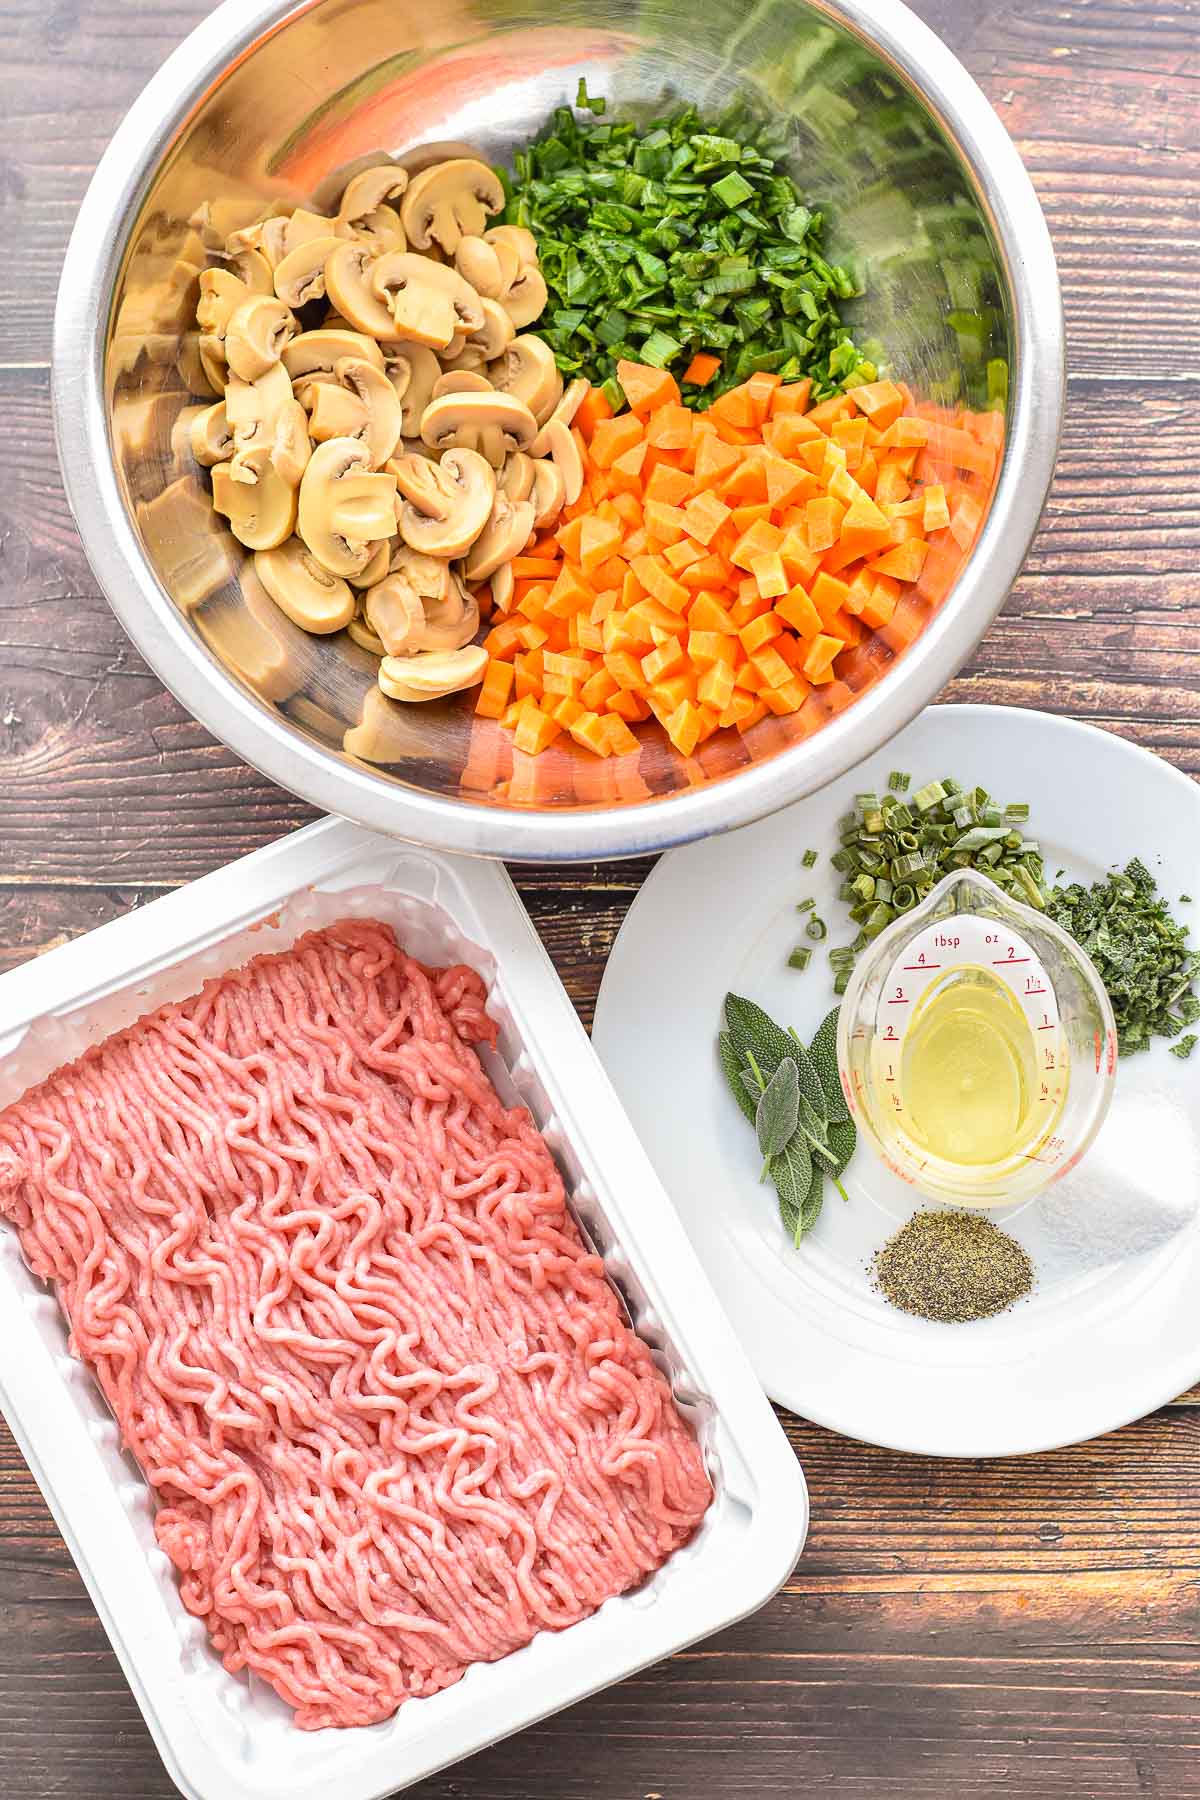 low fodmap low carb shepherd's pie turkey filling ingredients, including ground turkey, canned sliced mushrooms, finely chopped leek greens and carrots, garlic-infused olive oil, finely chopped fresh sage, dried choves, salt, pepper, and additional sage leaves for optional garnish.